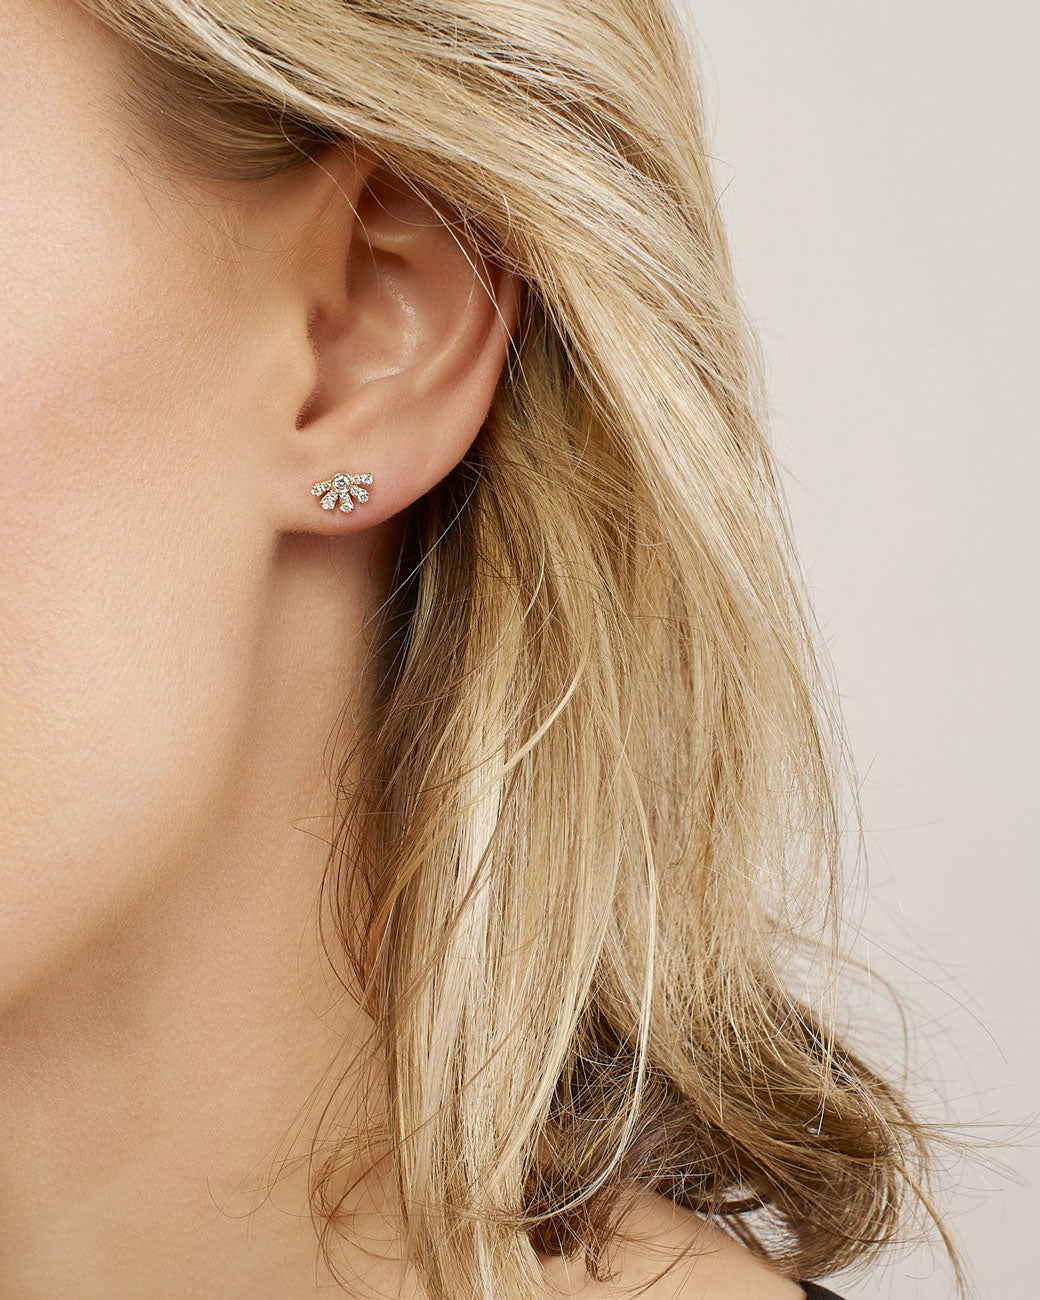 womans ear with a stud earring in it. it fits her lobe perfectly. the middle diamond has rays of more diamonds extending from it on one side.